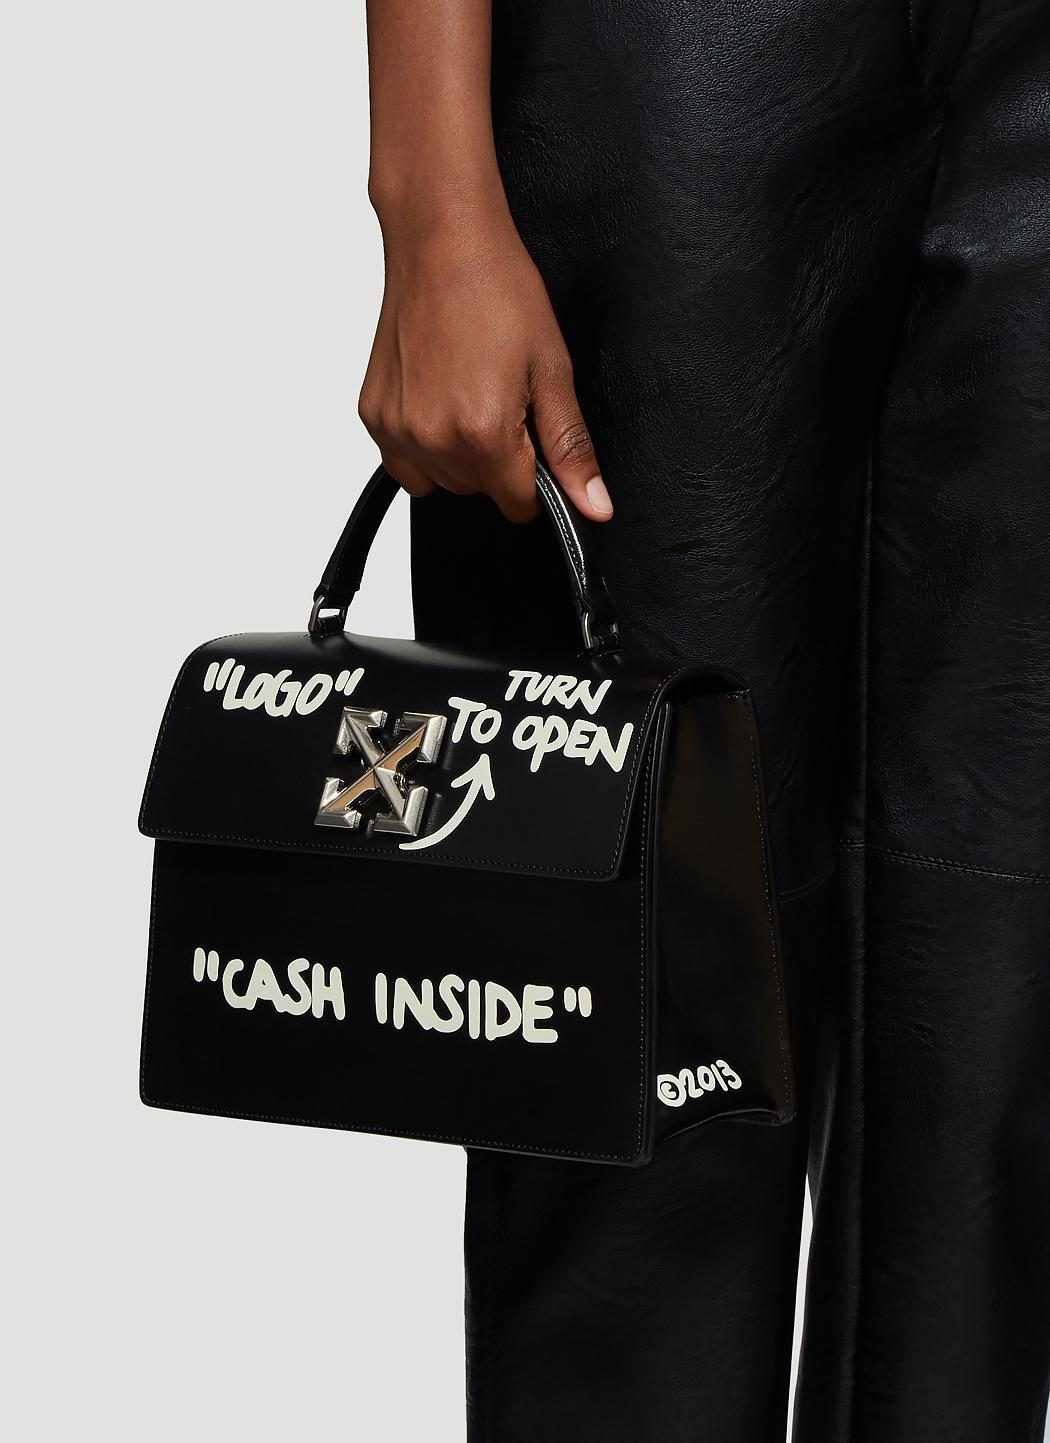 Virgil Abloh's Latest Off-White It Bag Is Intentionally “Unfunctional”